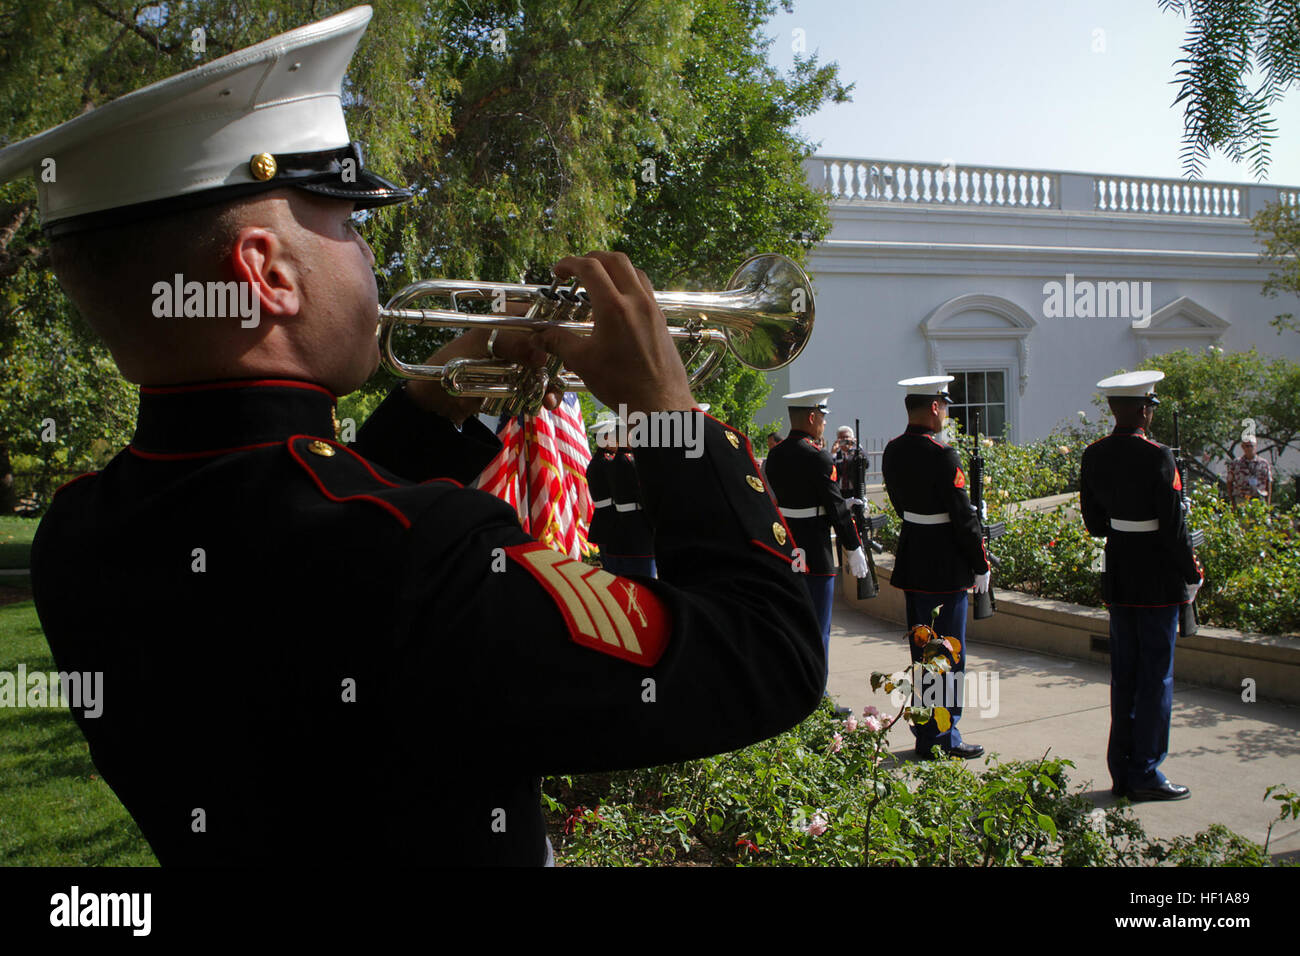 Sergeant John T. Finch, a trumpet player serving with the 1st Marine Division Band, plays taps to honor those who fought and died during the Vietnam War at the Richard Nixon Presidential Library and Museum for the Vietnam Prisoner of War 40th Annual Homecoming Reunion here, May 23, 2013. Nearly 200 former Vietnam POWs and their families gathered at the Nixon Presidential Library on the 40th anniversary of when President Nixon hosted the service members for the largest dinner ever held at the White House, May 24, 1973, on the South Lawn. A seven-man rifle detail and color guard from 1st Reconna Stock Photo